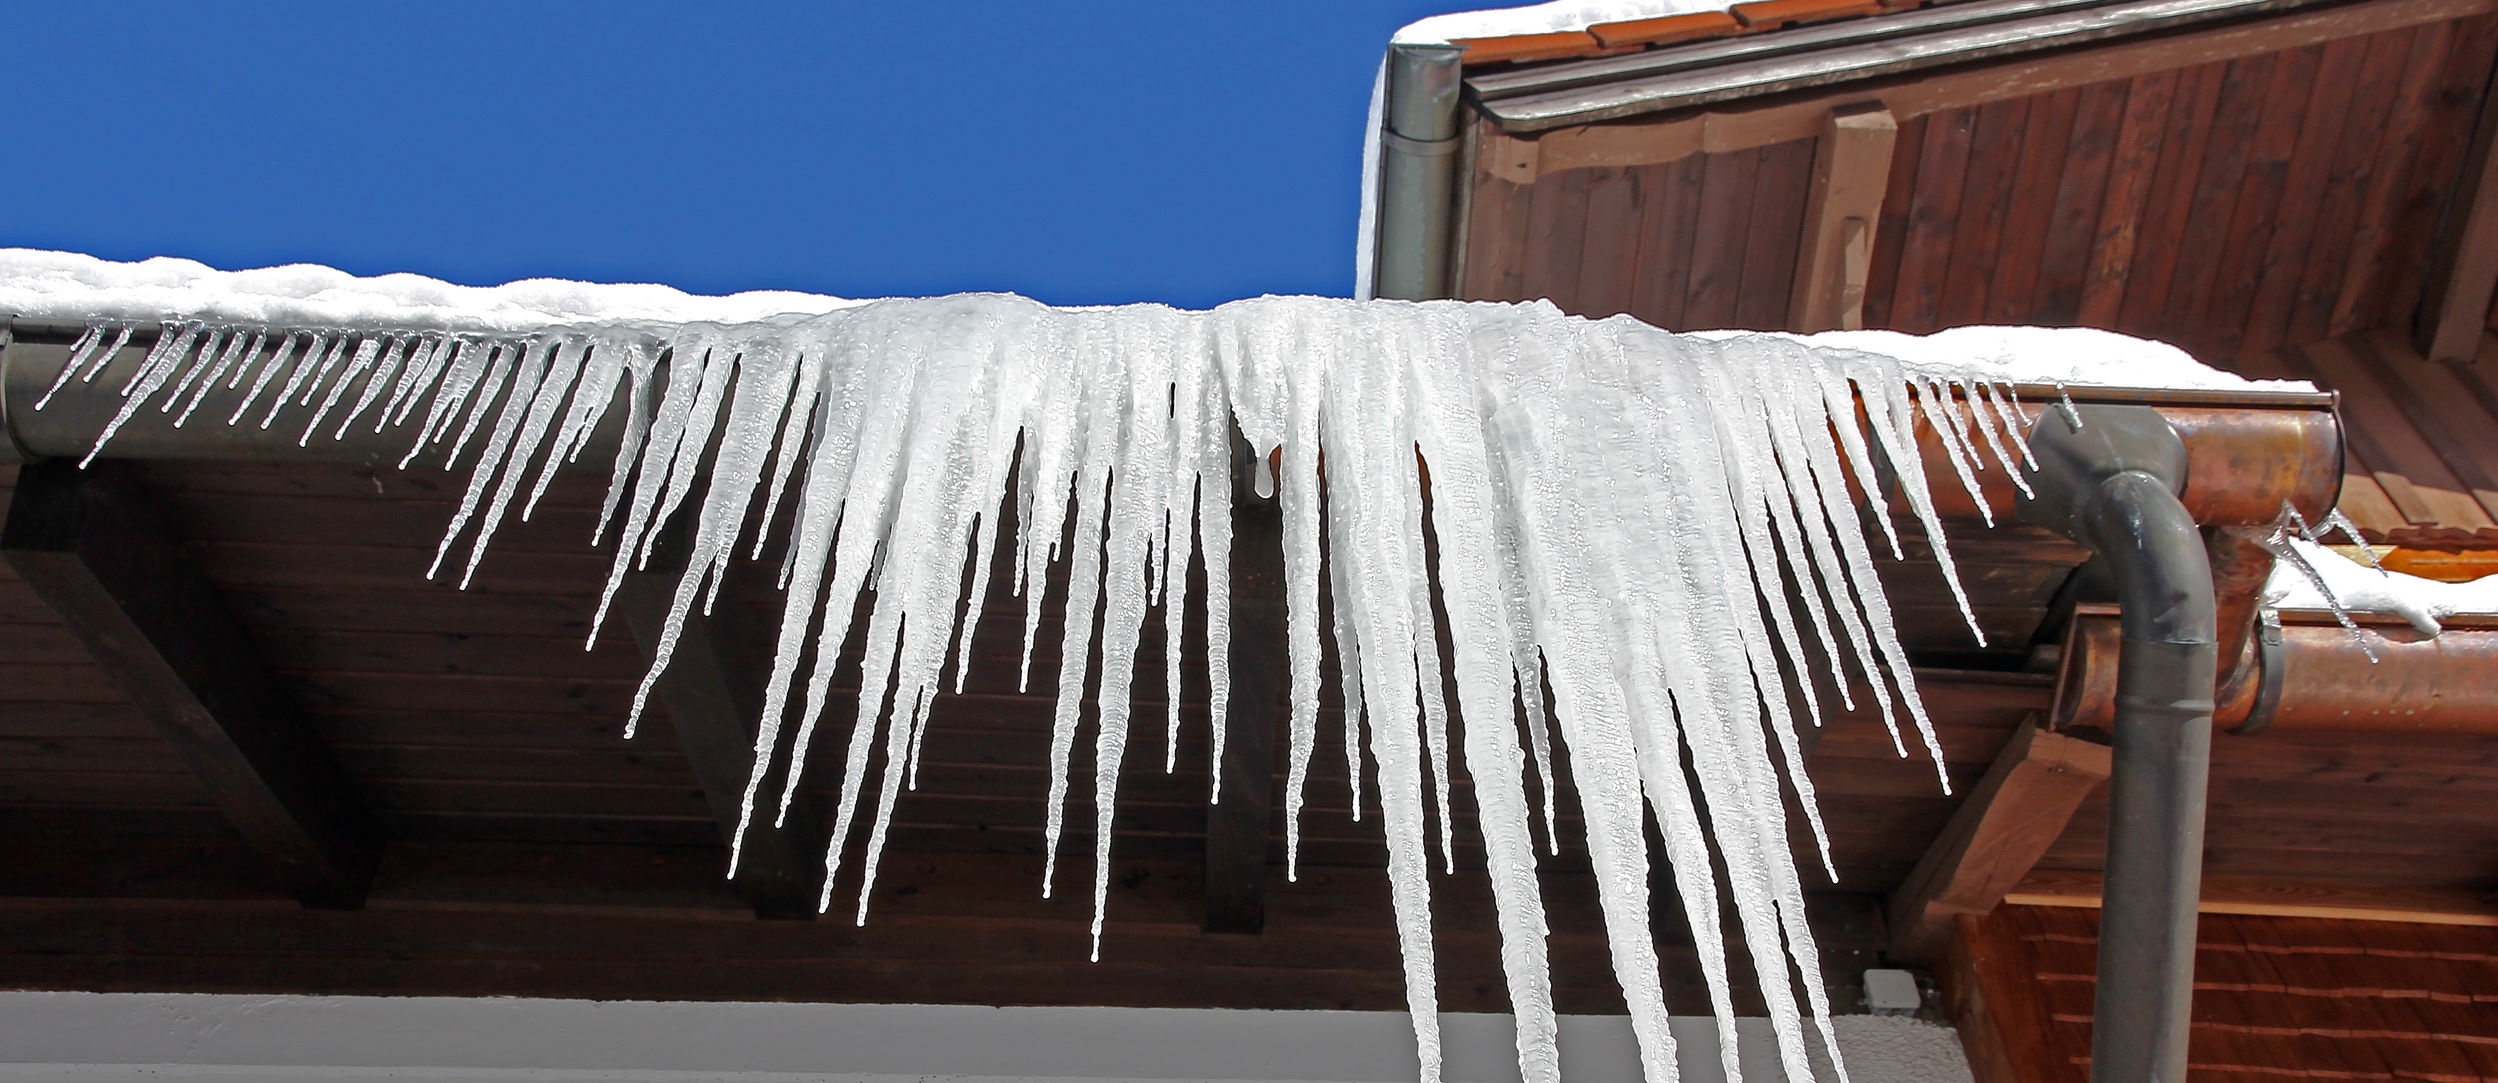 Large icicles hanging from a house roof